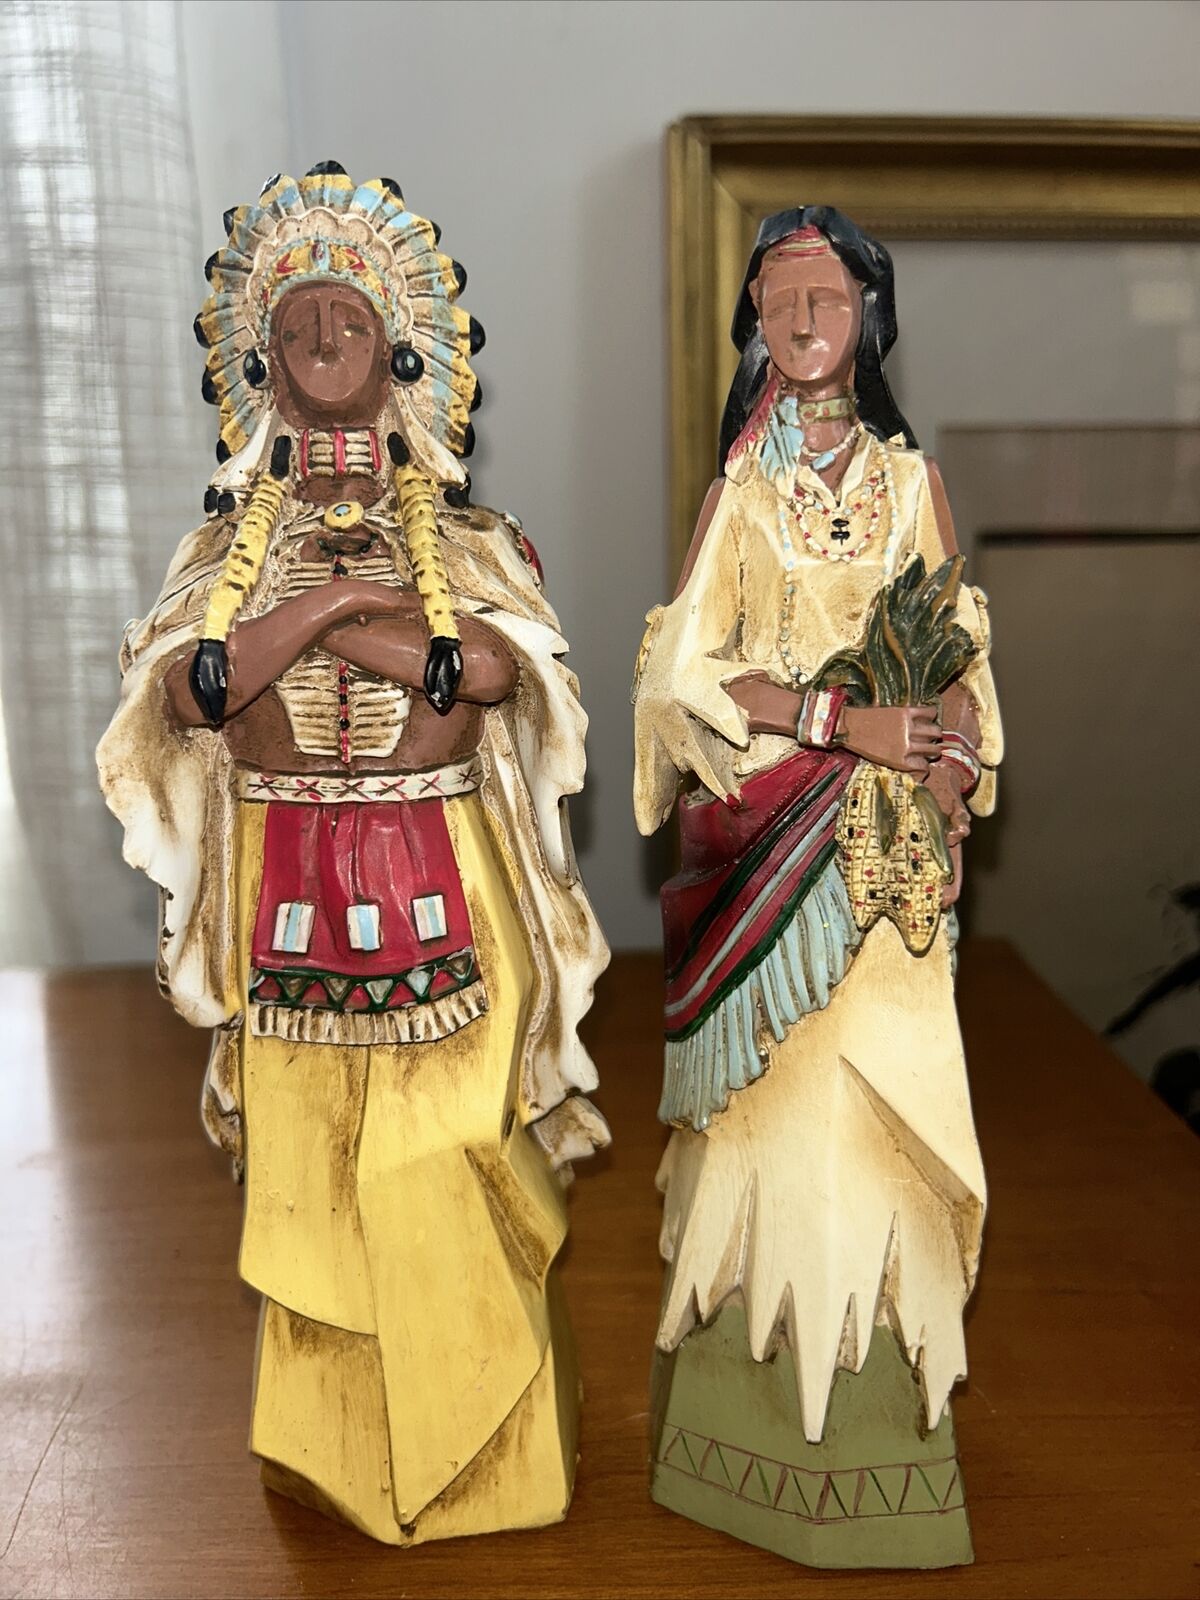 Pacific Rim Cubist Native American Indian Figurines Couple Wood Look Resin 9”